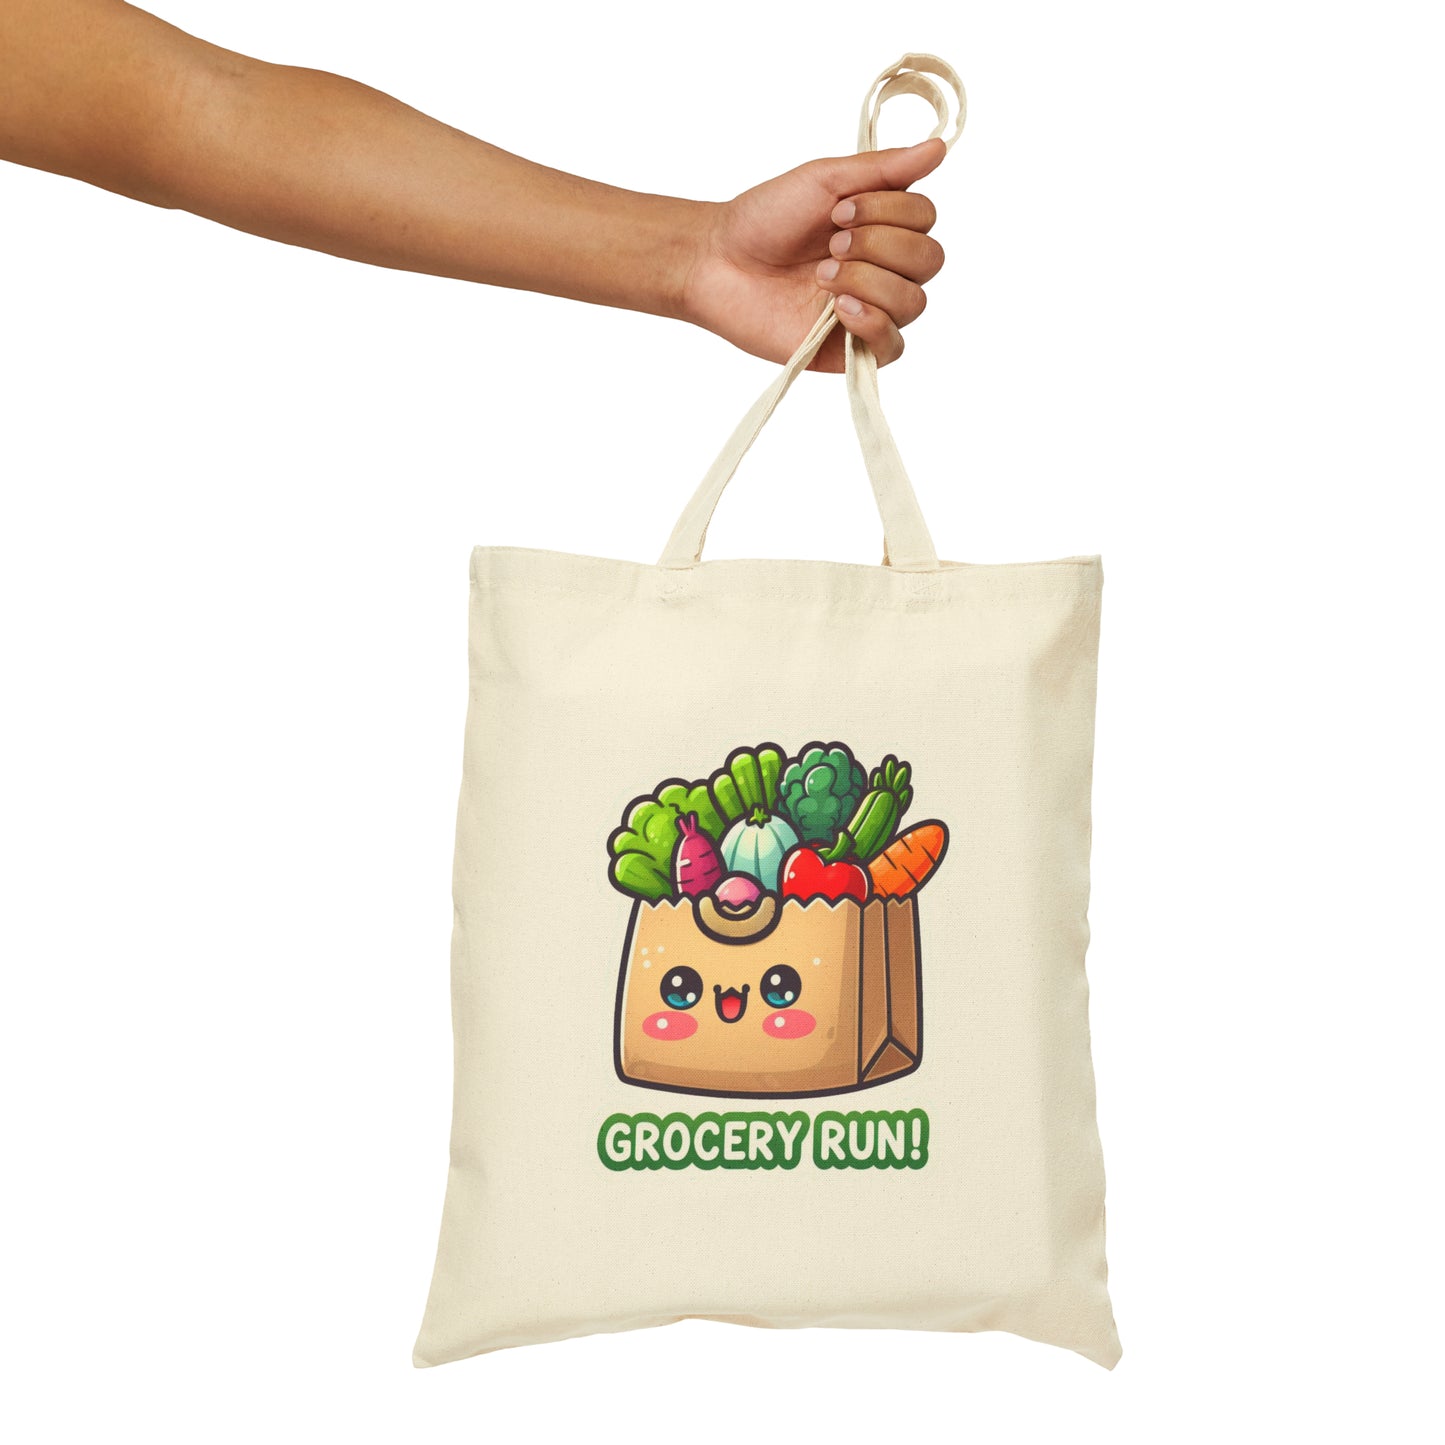 Grocery Run Cotton Canvas Tote Bag